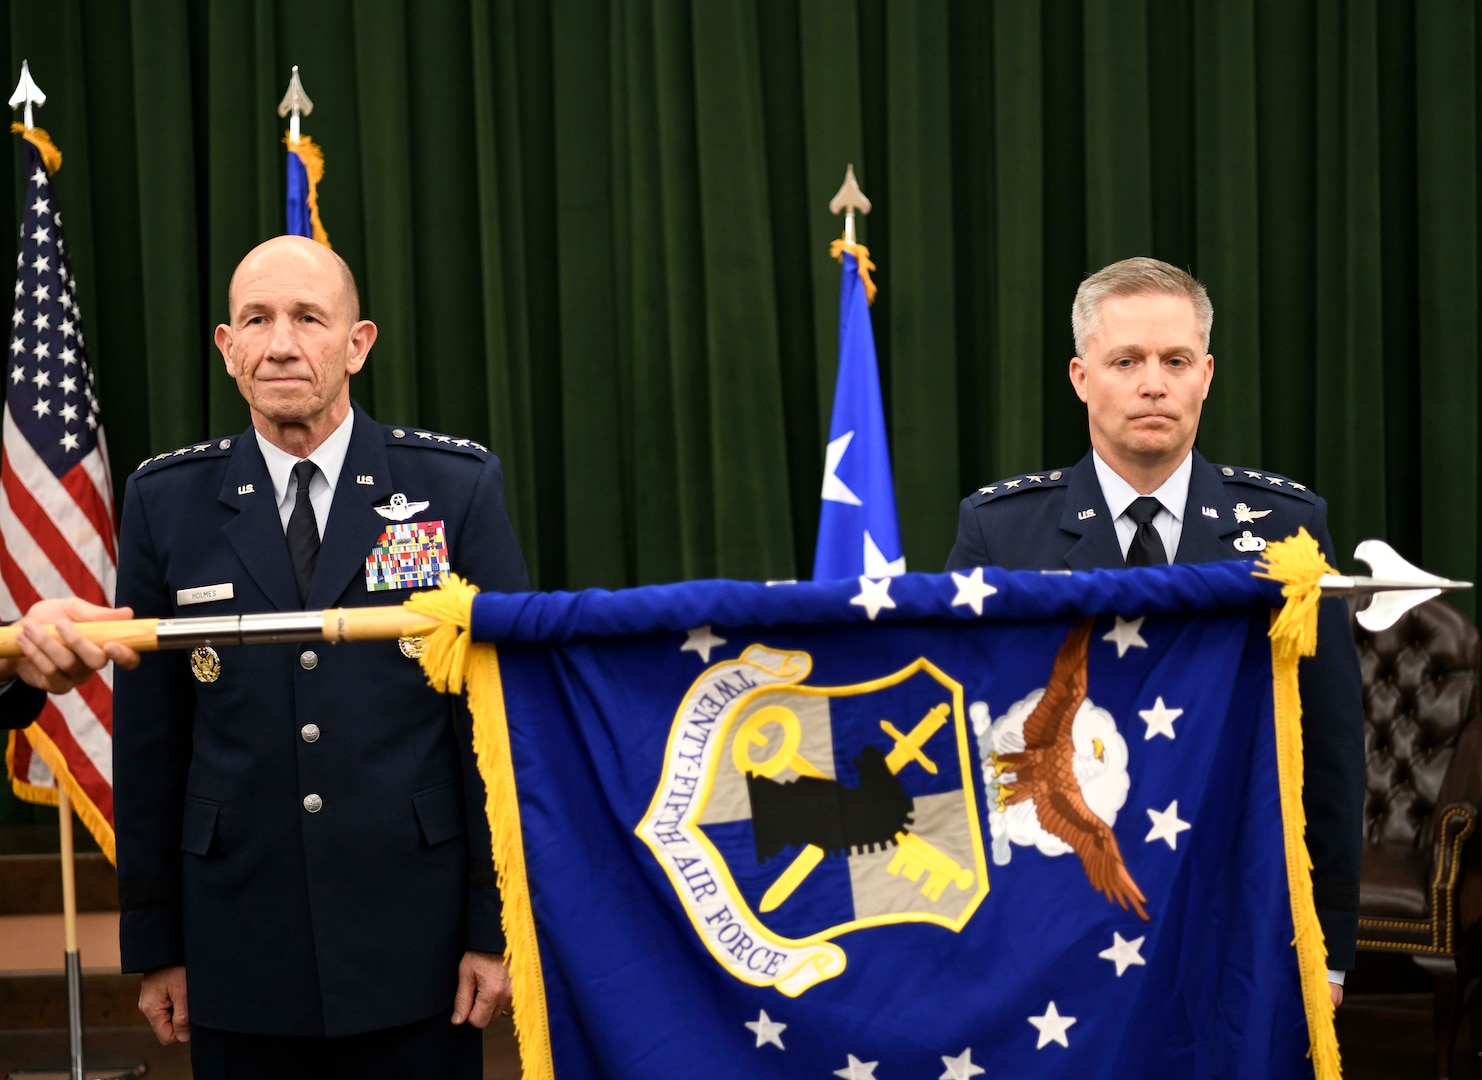 The Twenty-Fifth Air Force flag is furled to signify its inactivation, as Gen. Mike Holmes, Air Combat Command commander, and Lt. Gen. Timothy Haugh, Twenty-Fifth Air Force commander, look on during the Sixteenth Air Force assumption of command at Joint Base San Antonio-Lackland, Texas, Oct. 11, 2019. The Twenty-Fourth Air Force was also inactivated during the ceremony to integrate into the new information warfare numbered air force. Sixteenth Air Force is responsible for providing information warfare capabilities to combatant commanders with the speed to match today’s technological environment.